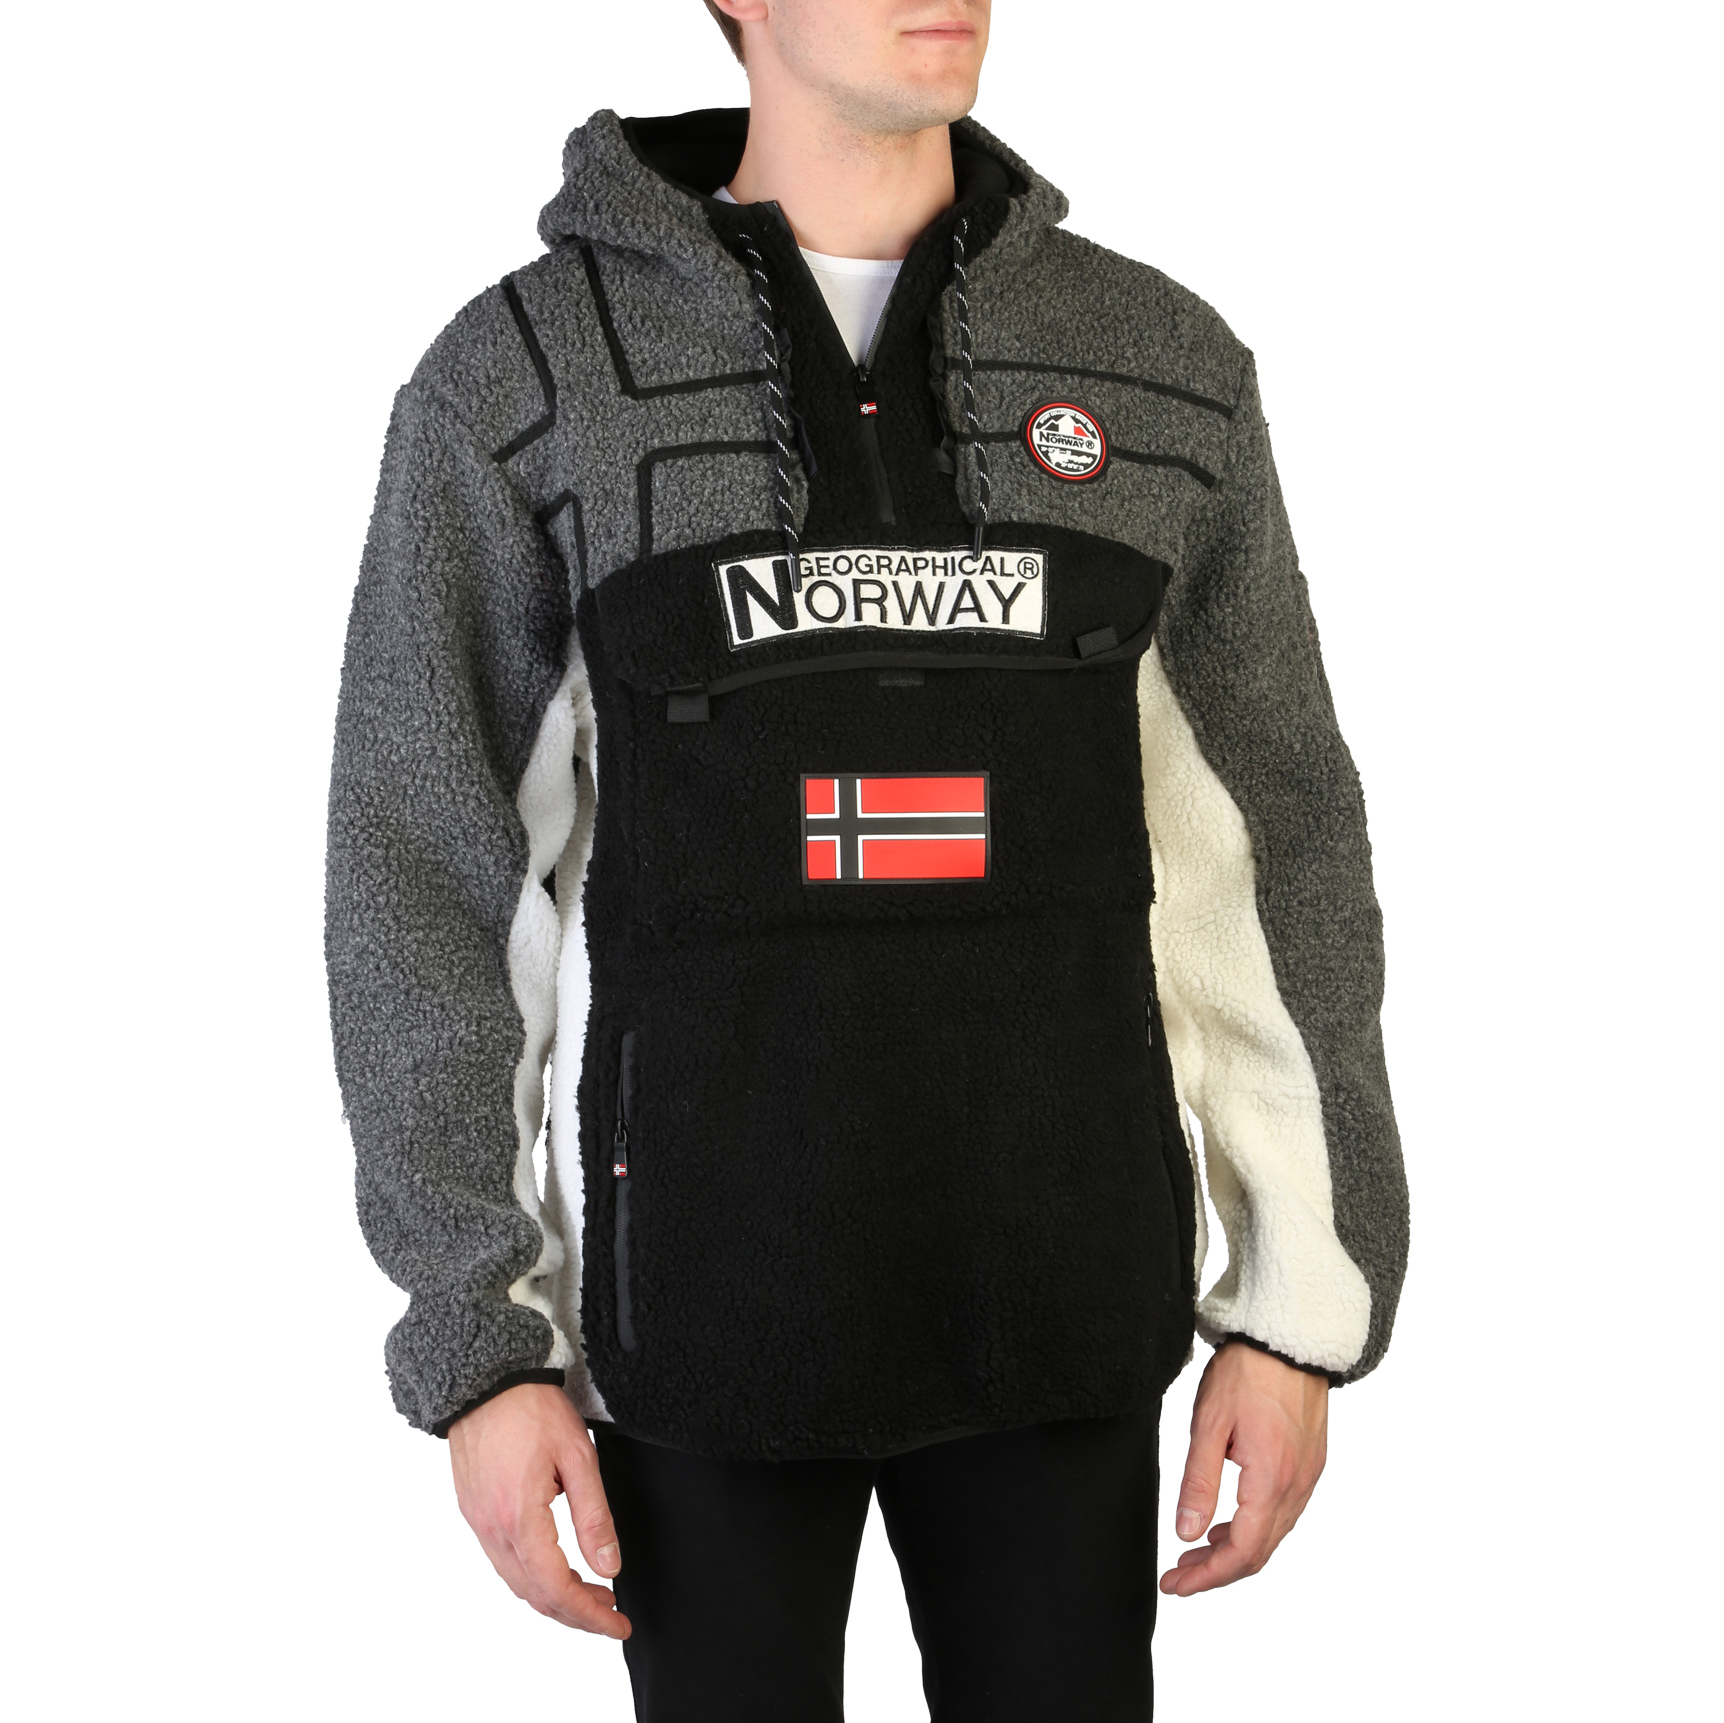 Geographical Norway Riakolo man